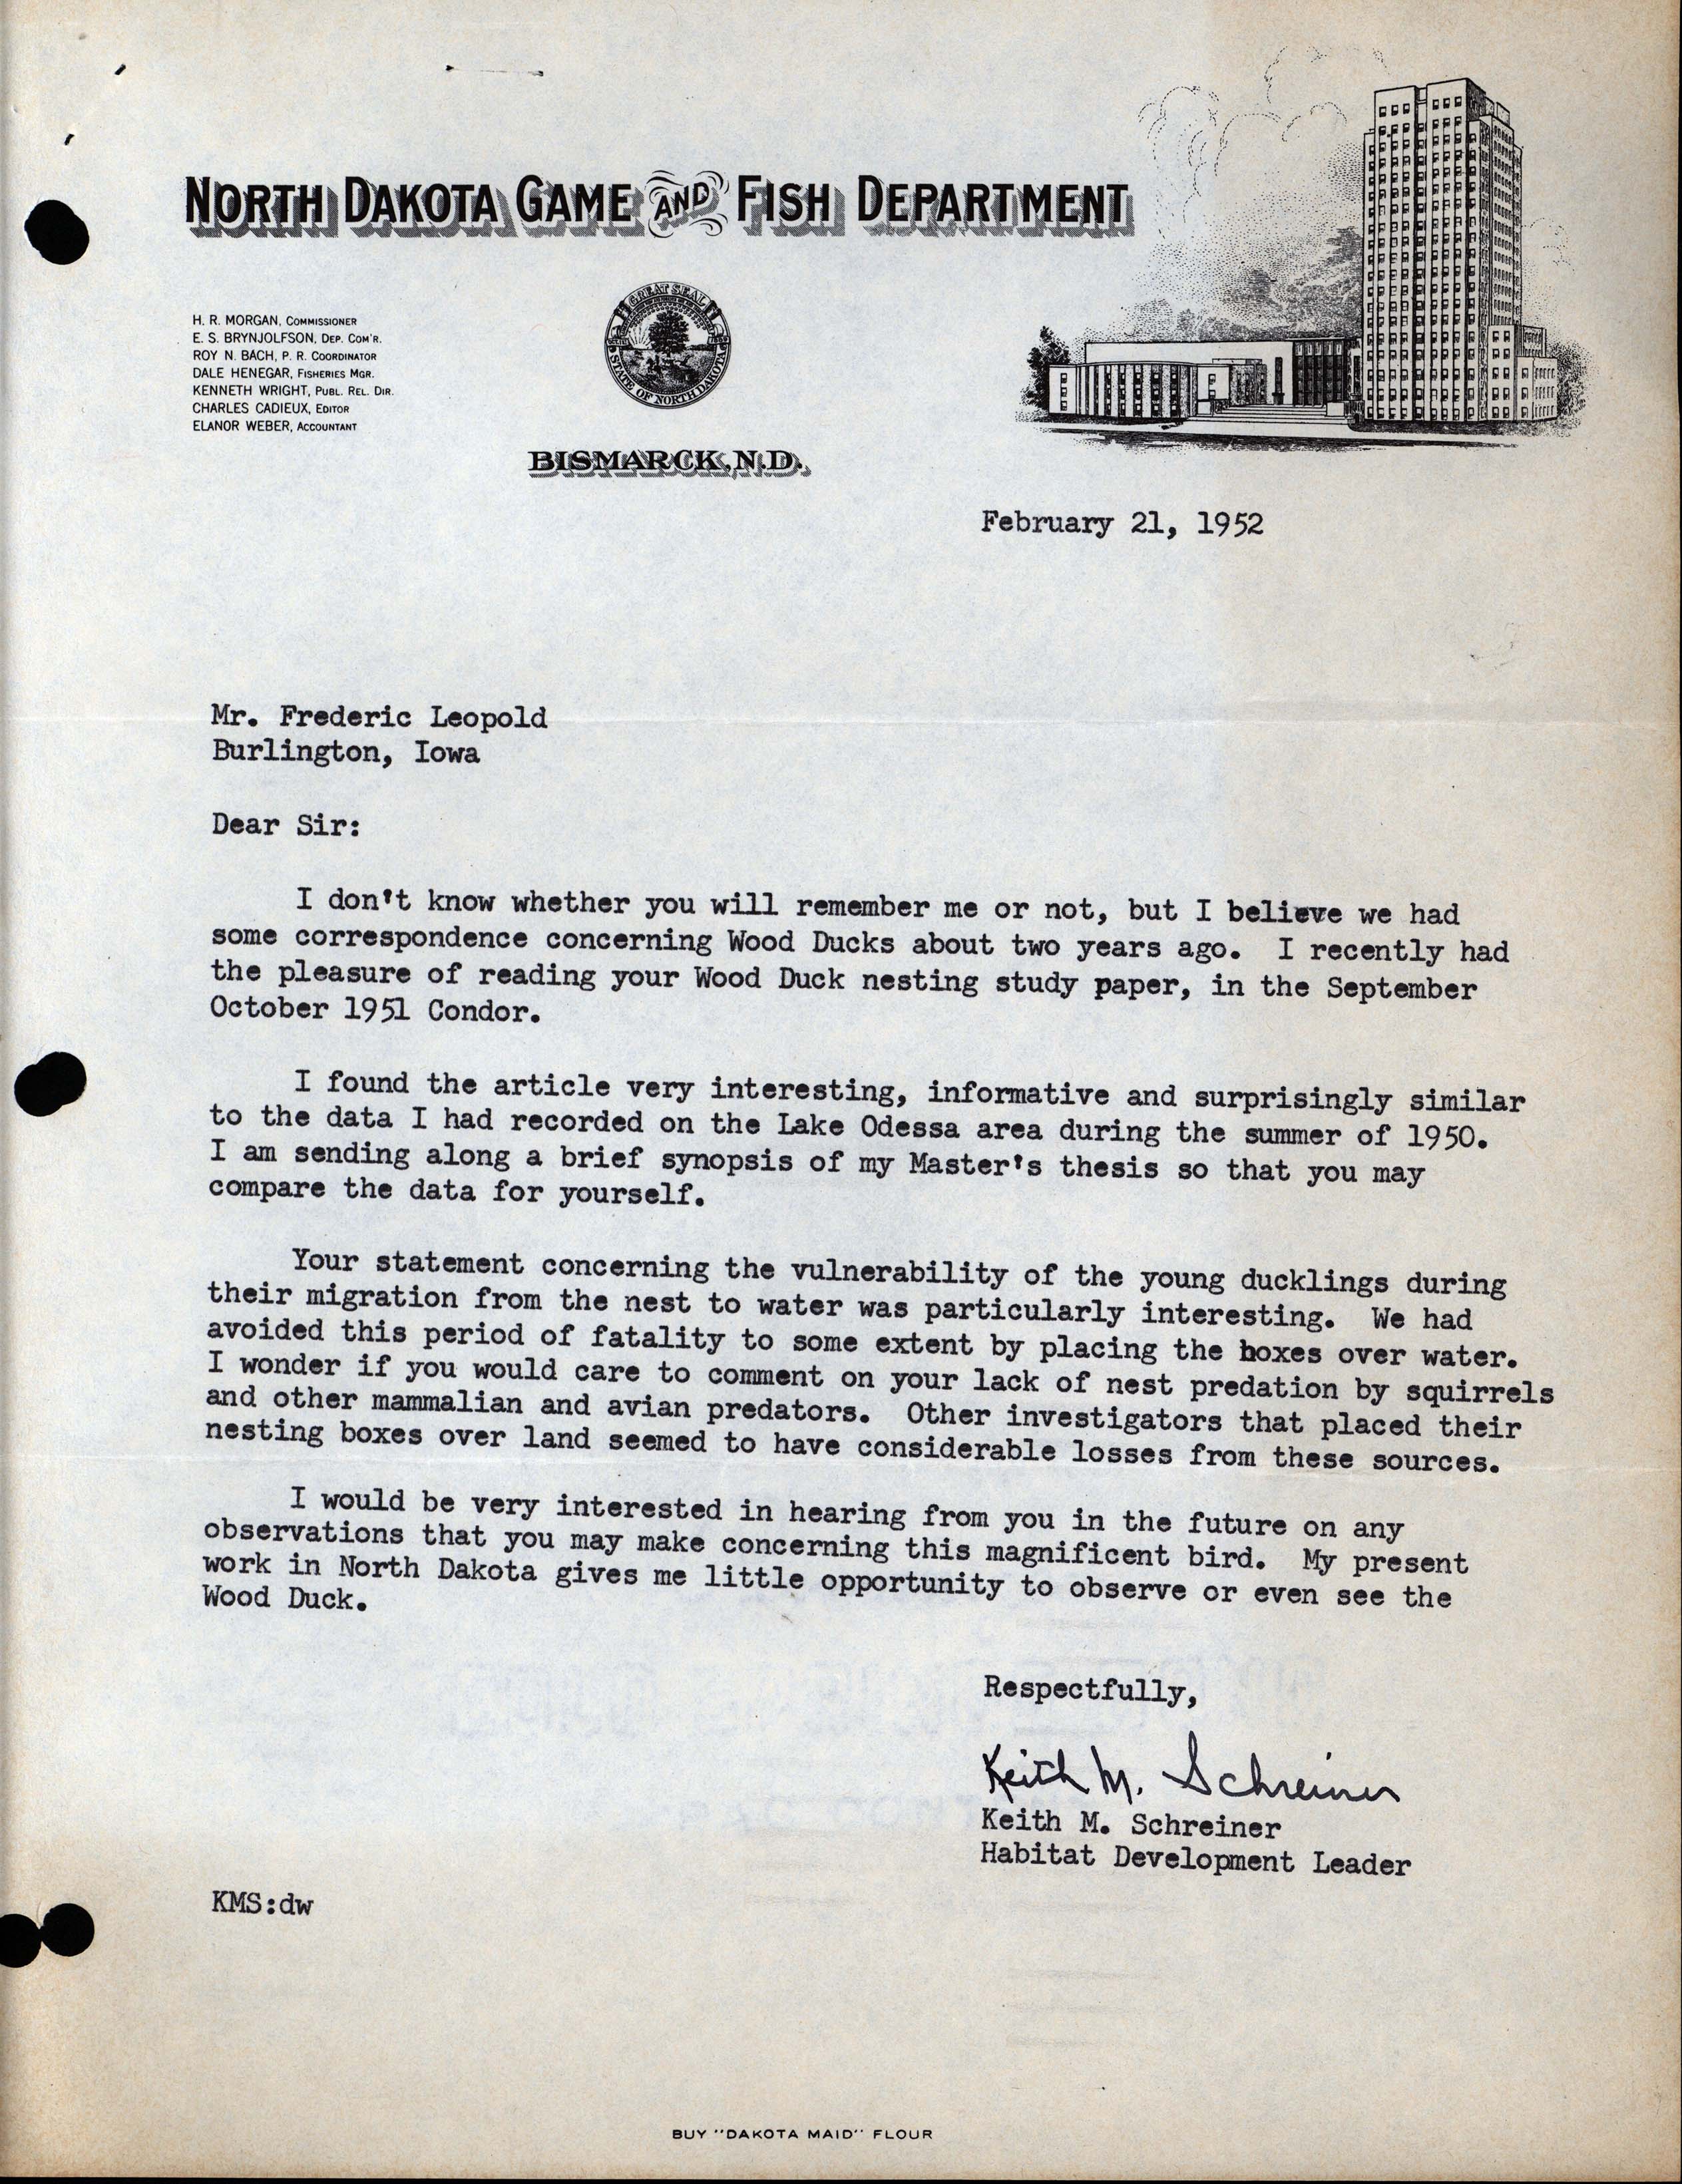 Keith M. Schreiner letter to Frederic Leopold regarding a Wood Duck nesting study paper, February 21, 1952